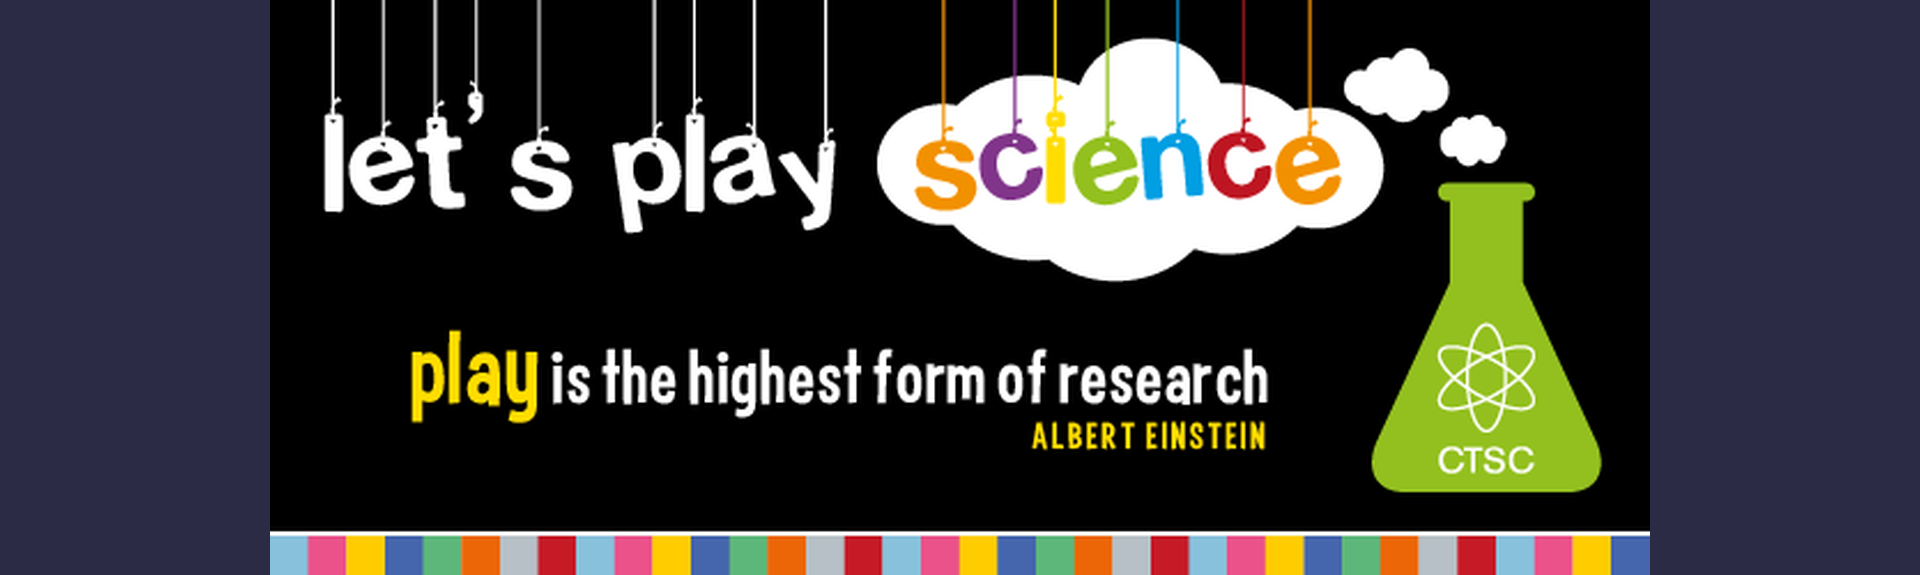 Cape Town Science Centre Holiday Programme 